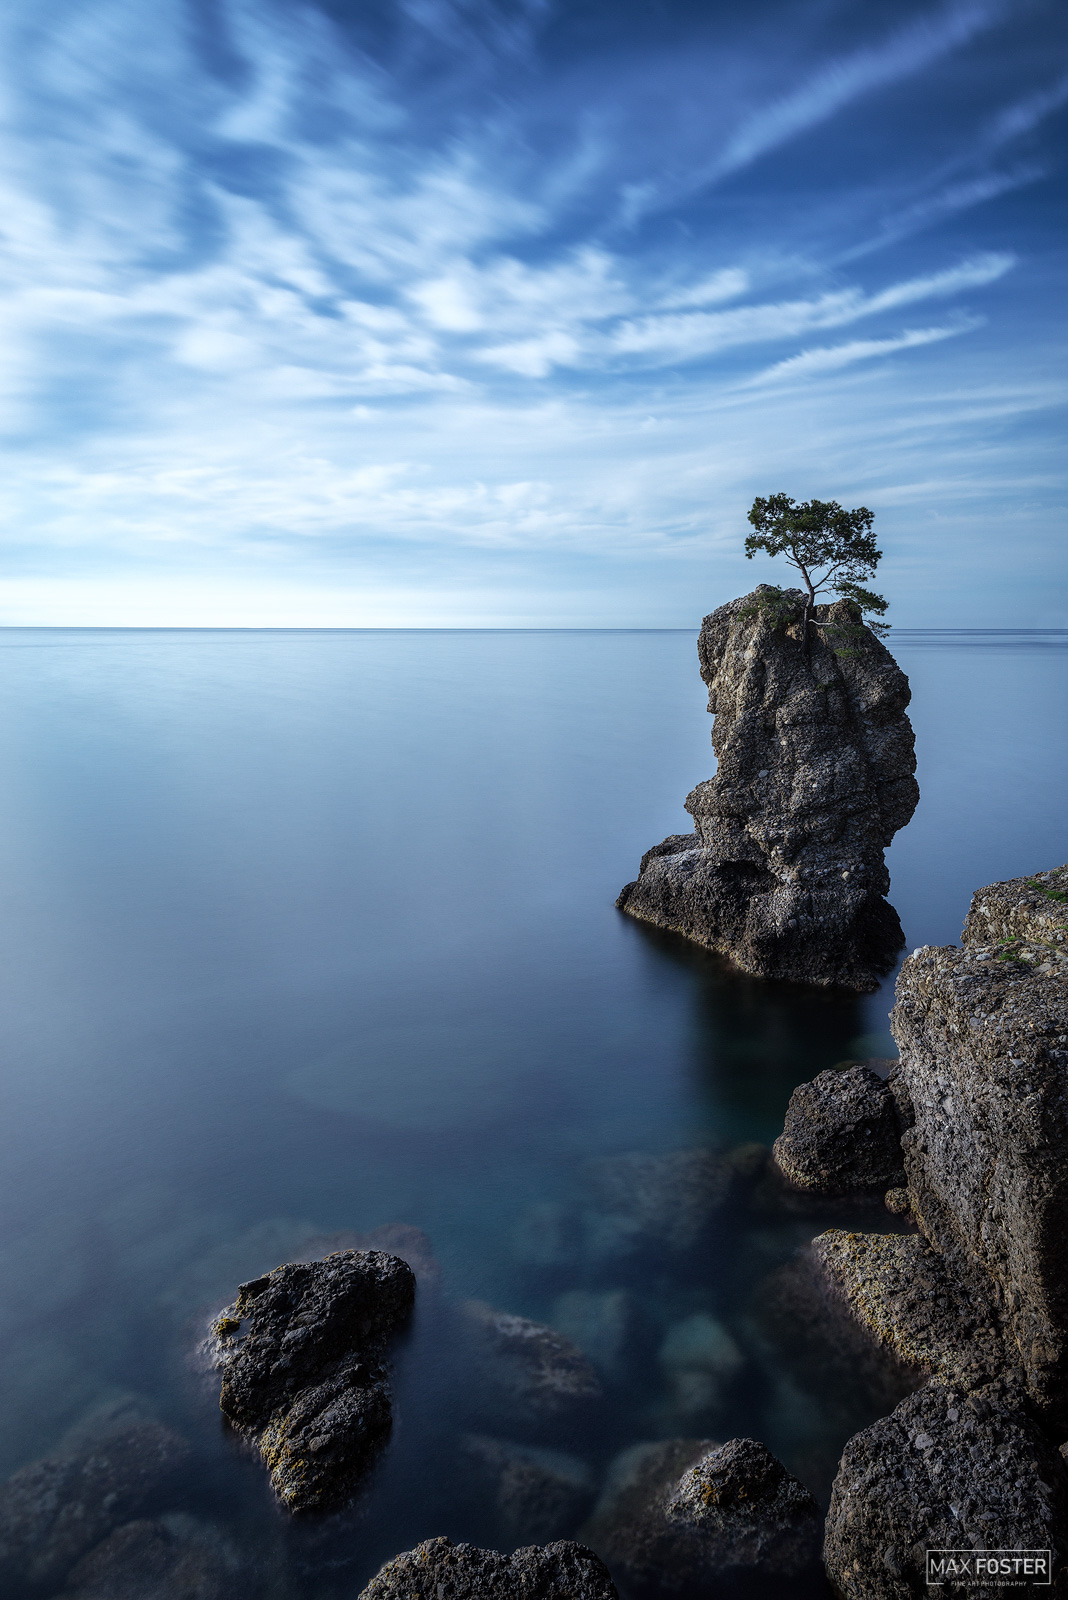 Elevate your space with The Lone Tree, Max Foster's limited edition photography print of a lone cypress off the coast of Portofino...